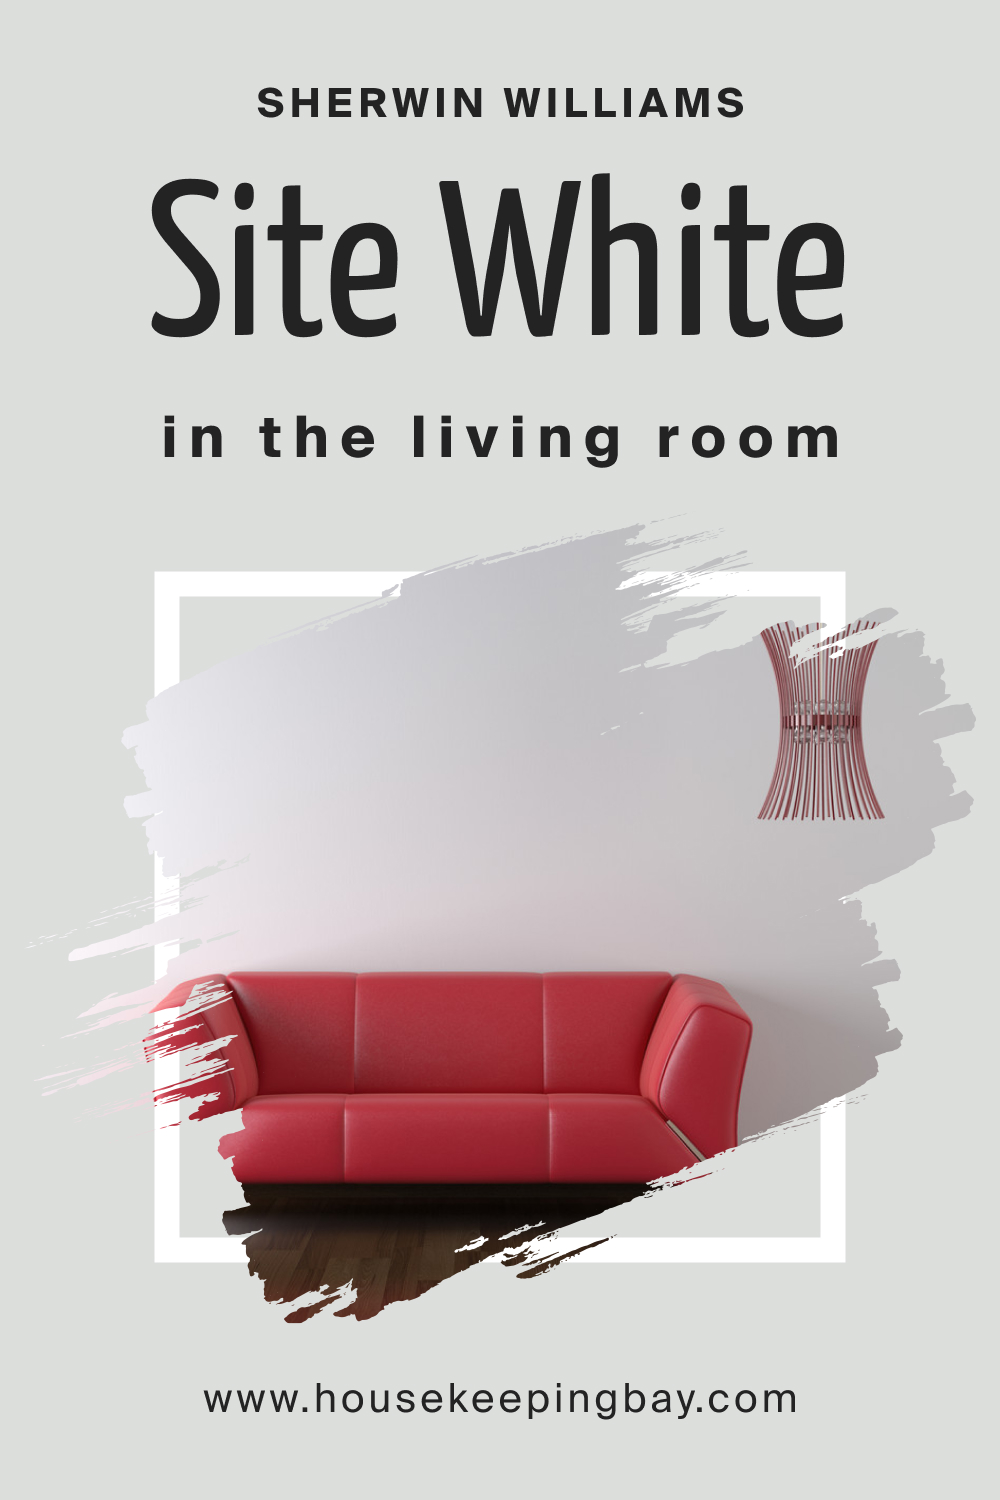 Sherwin Williams. SW Site White In the Living Room